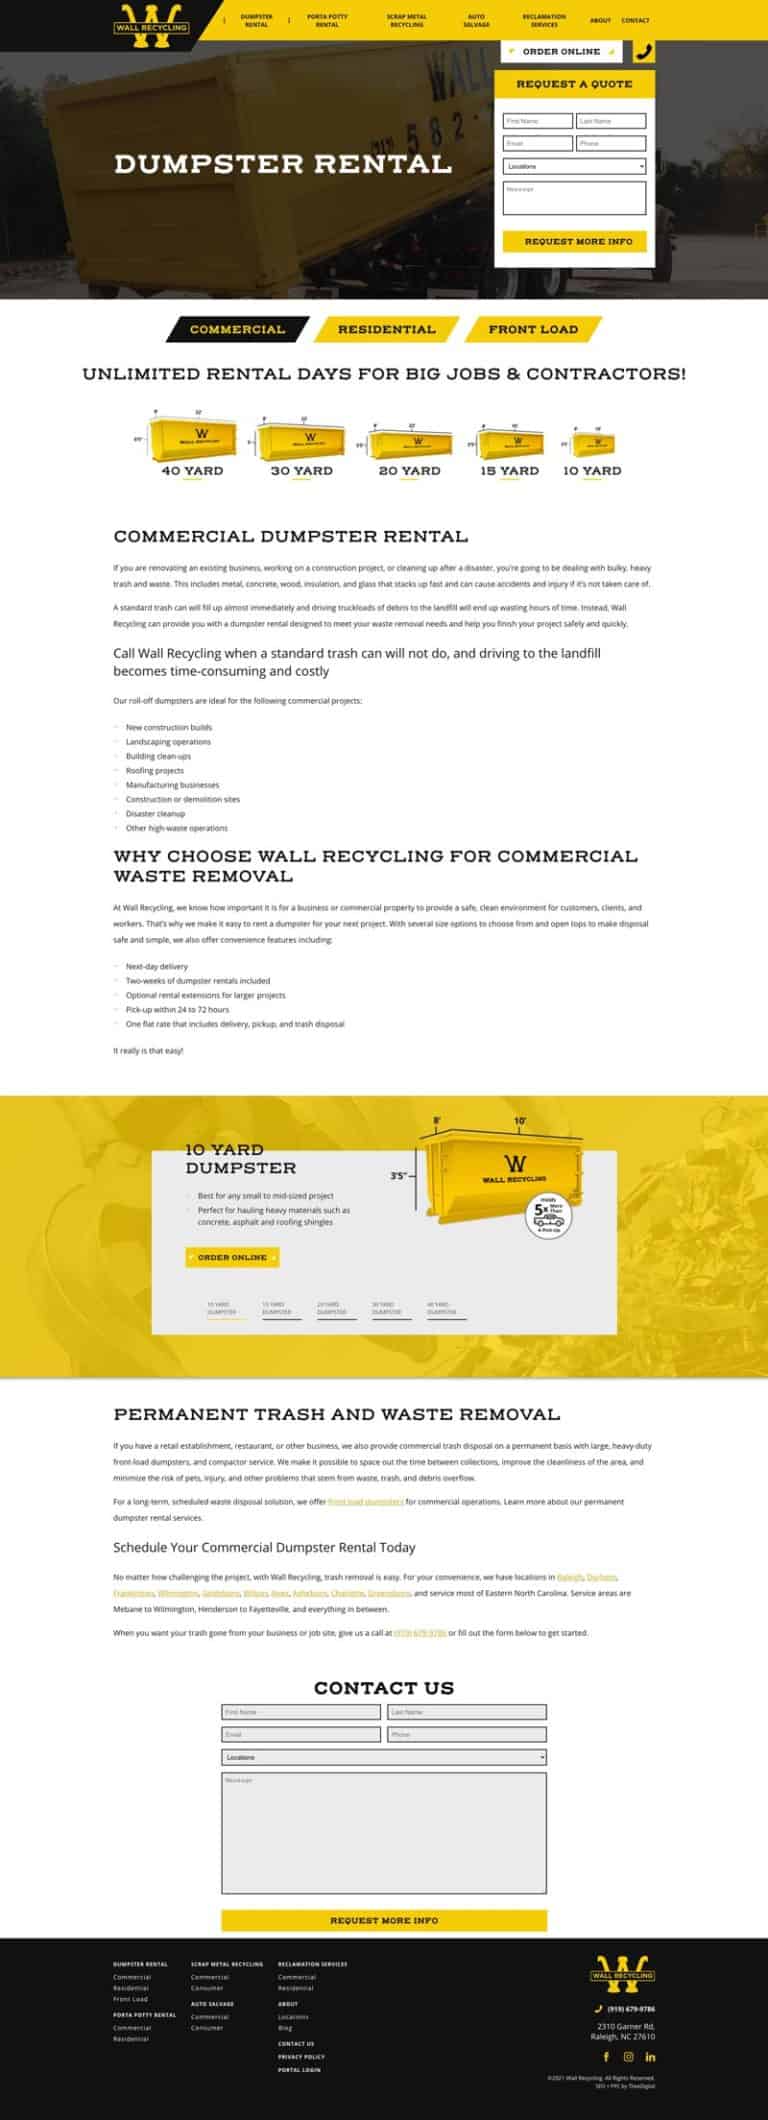 Marketing and PPC for a Construction Recycling Company